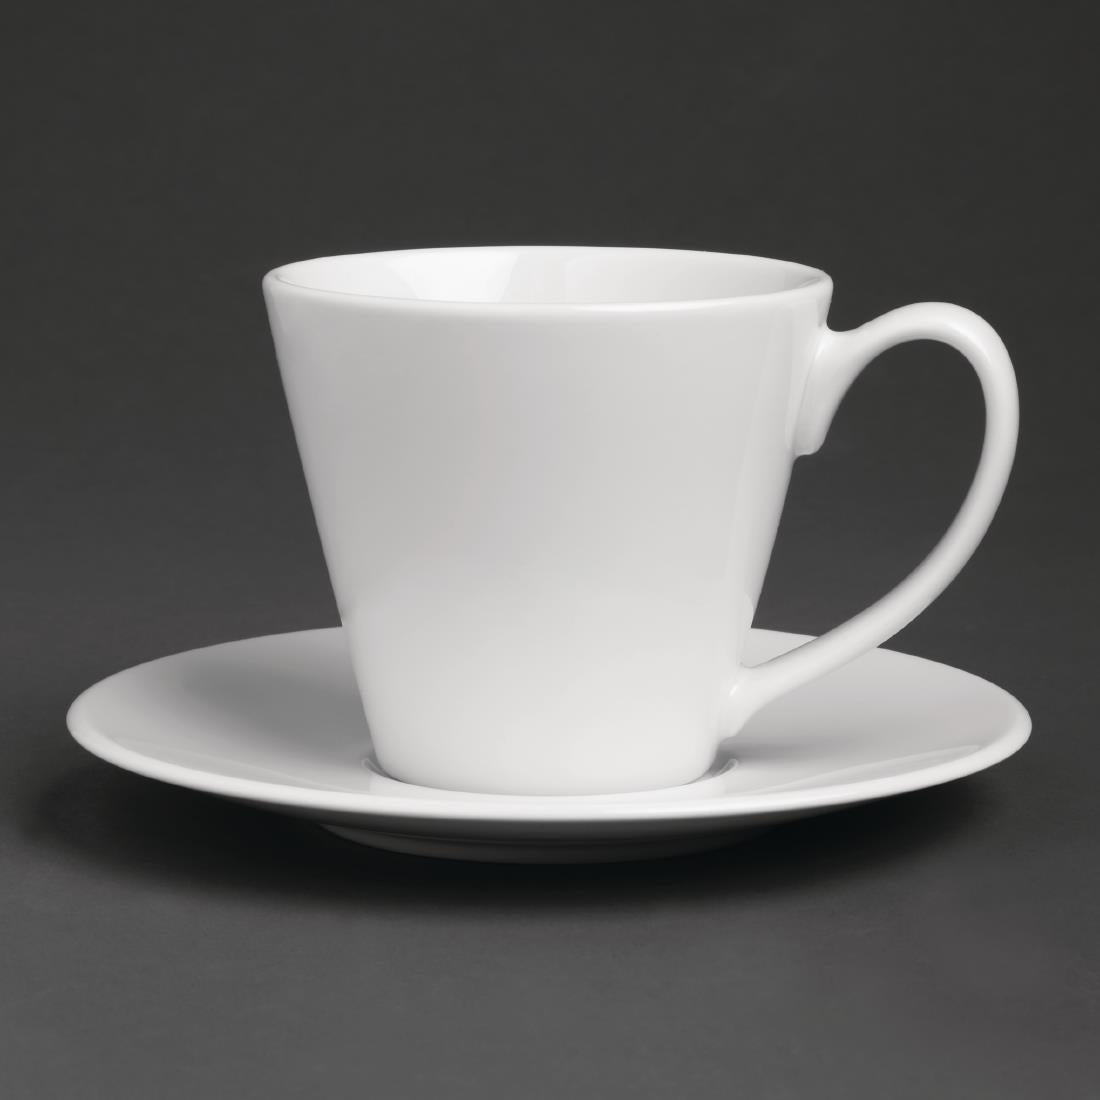 Royal Porcelain Classic White Tea Cup Saucer 145mm (Pack of 12)